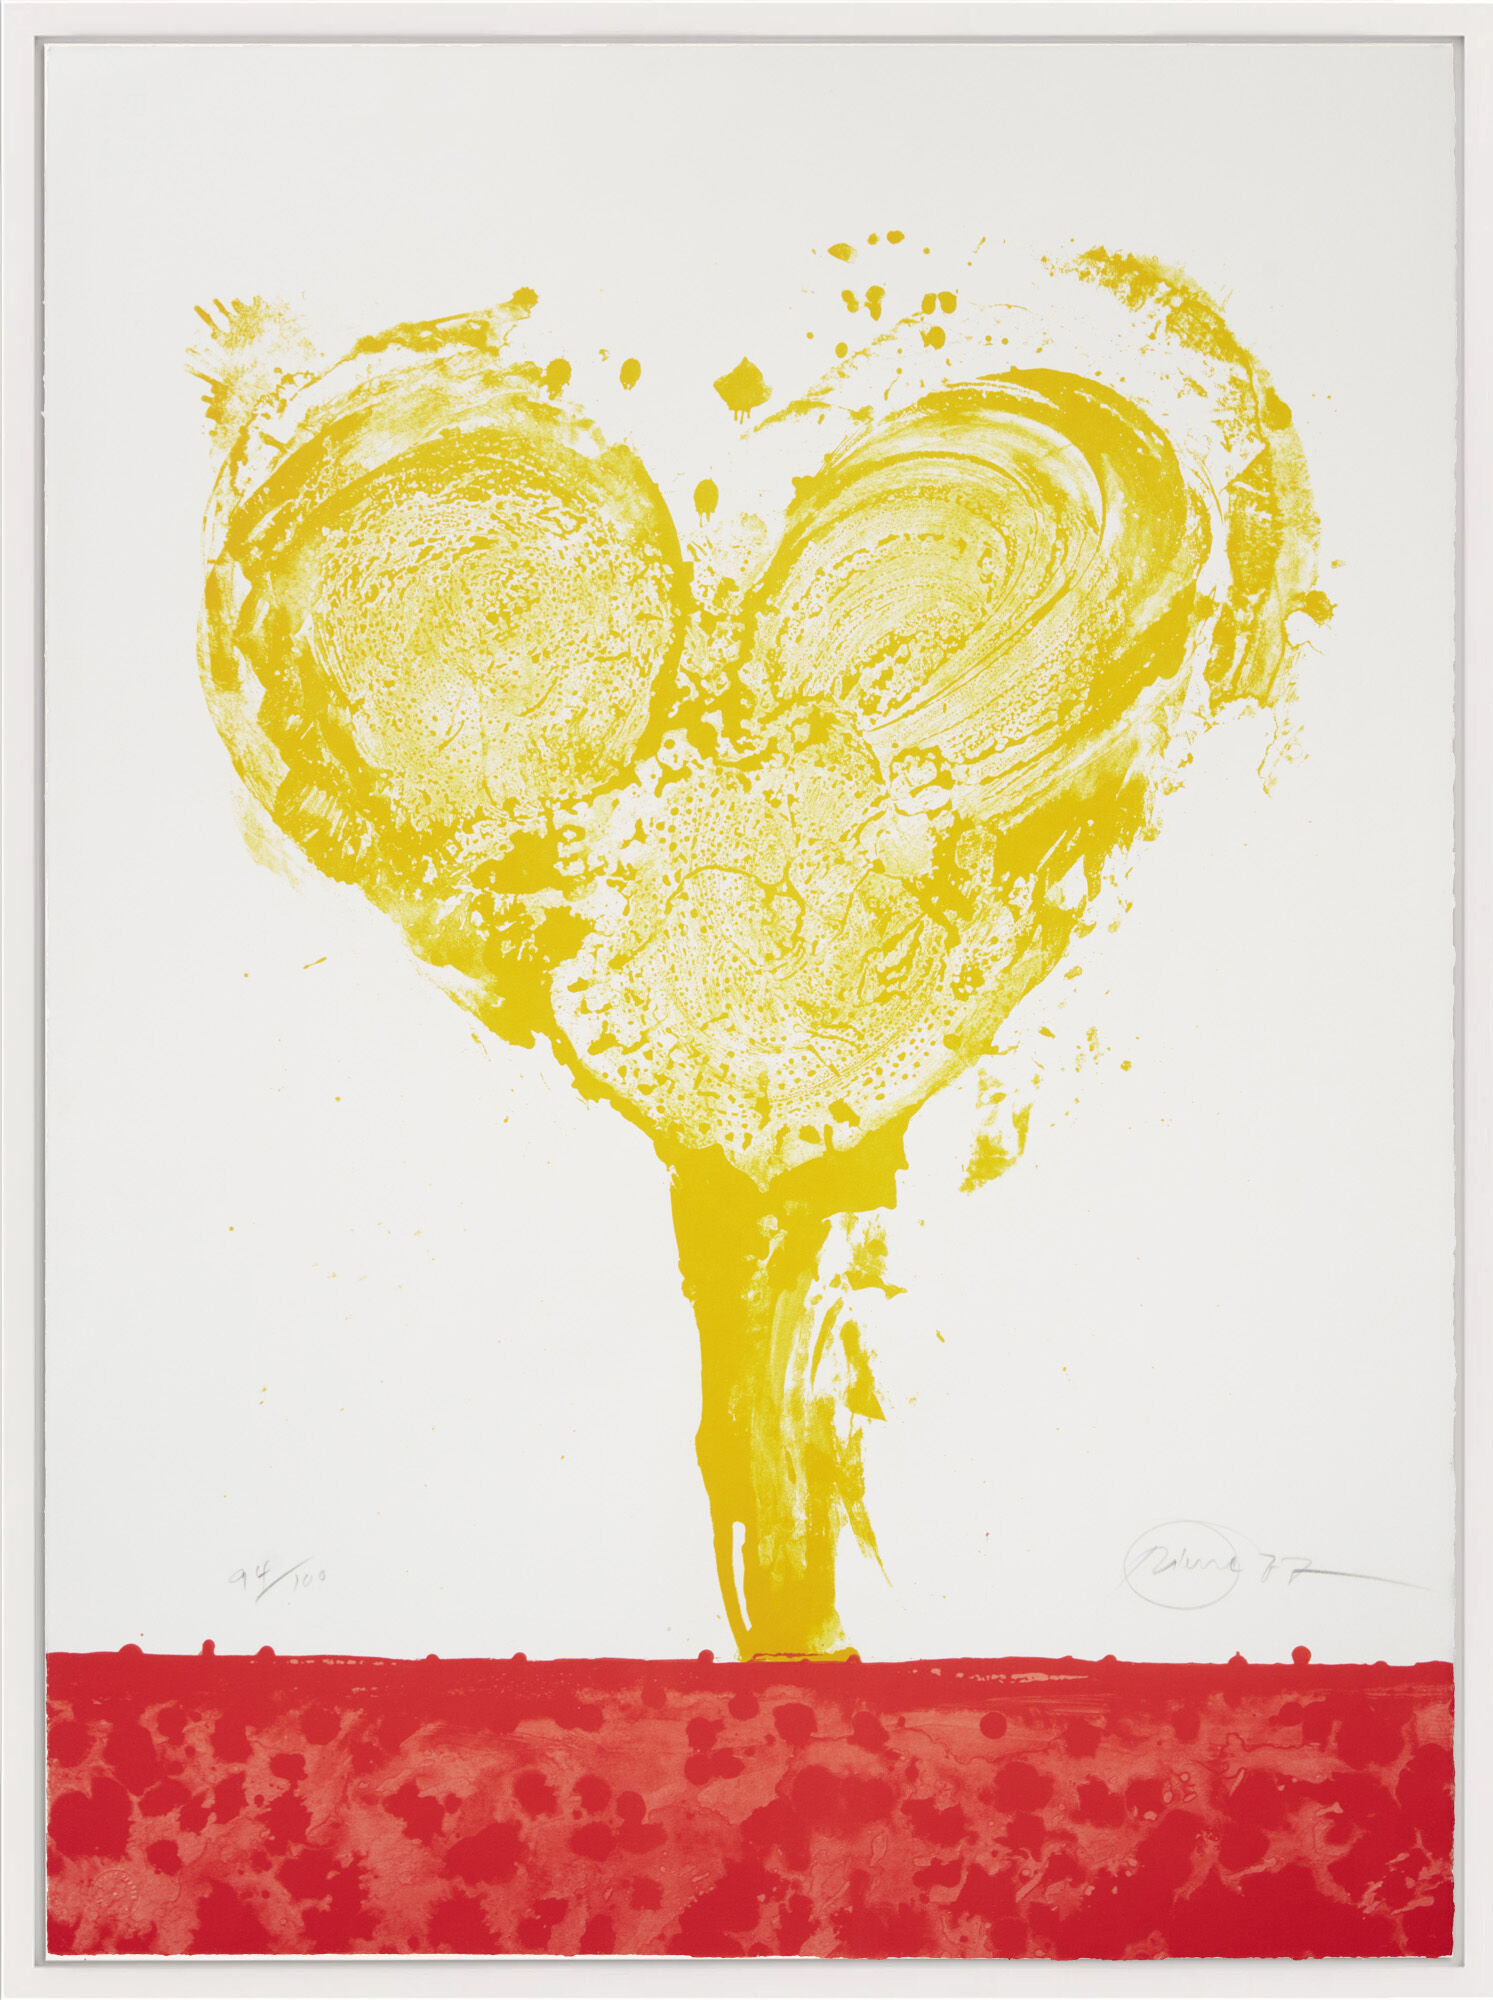 Picture "Heart of Spain" (1977) by Otto Piene